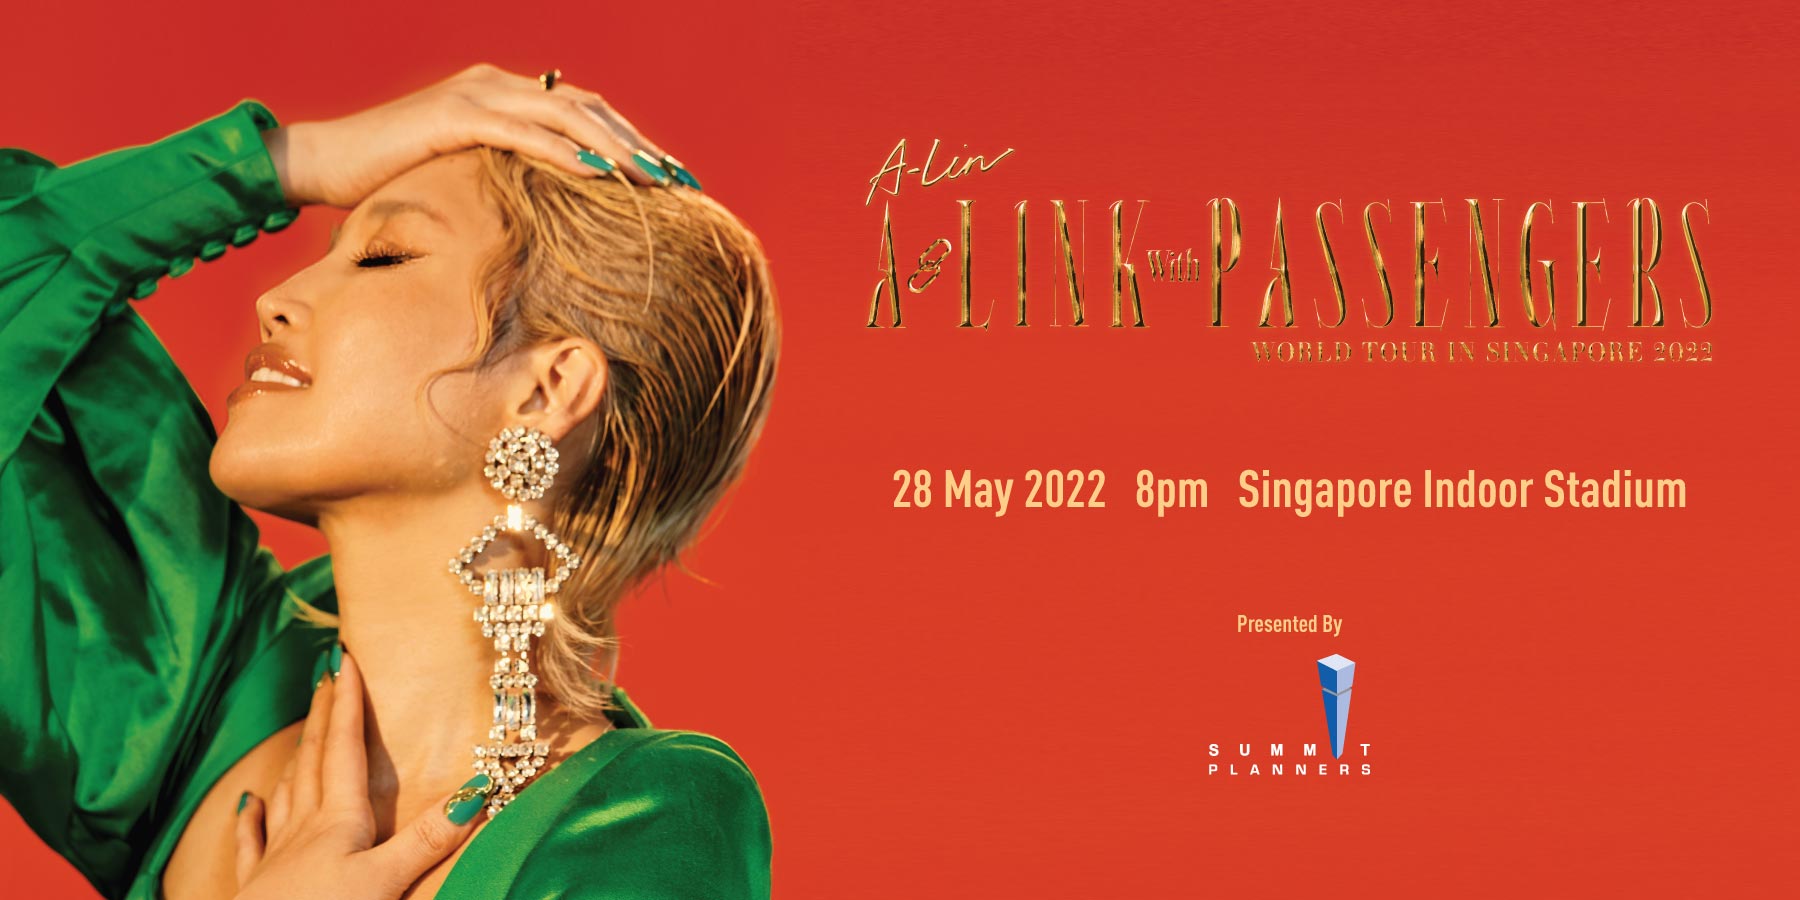 A-Lin "A-LINK with PASSENGERS" World Tour in Singapore 2022